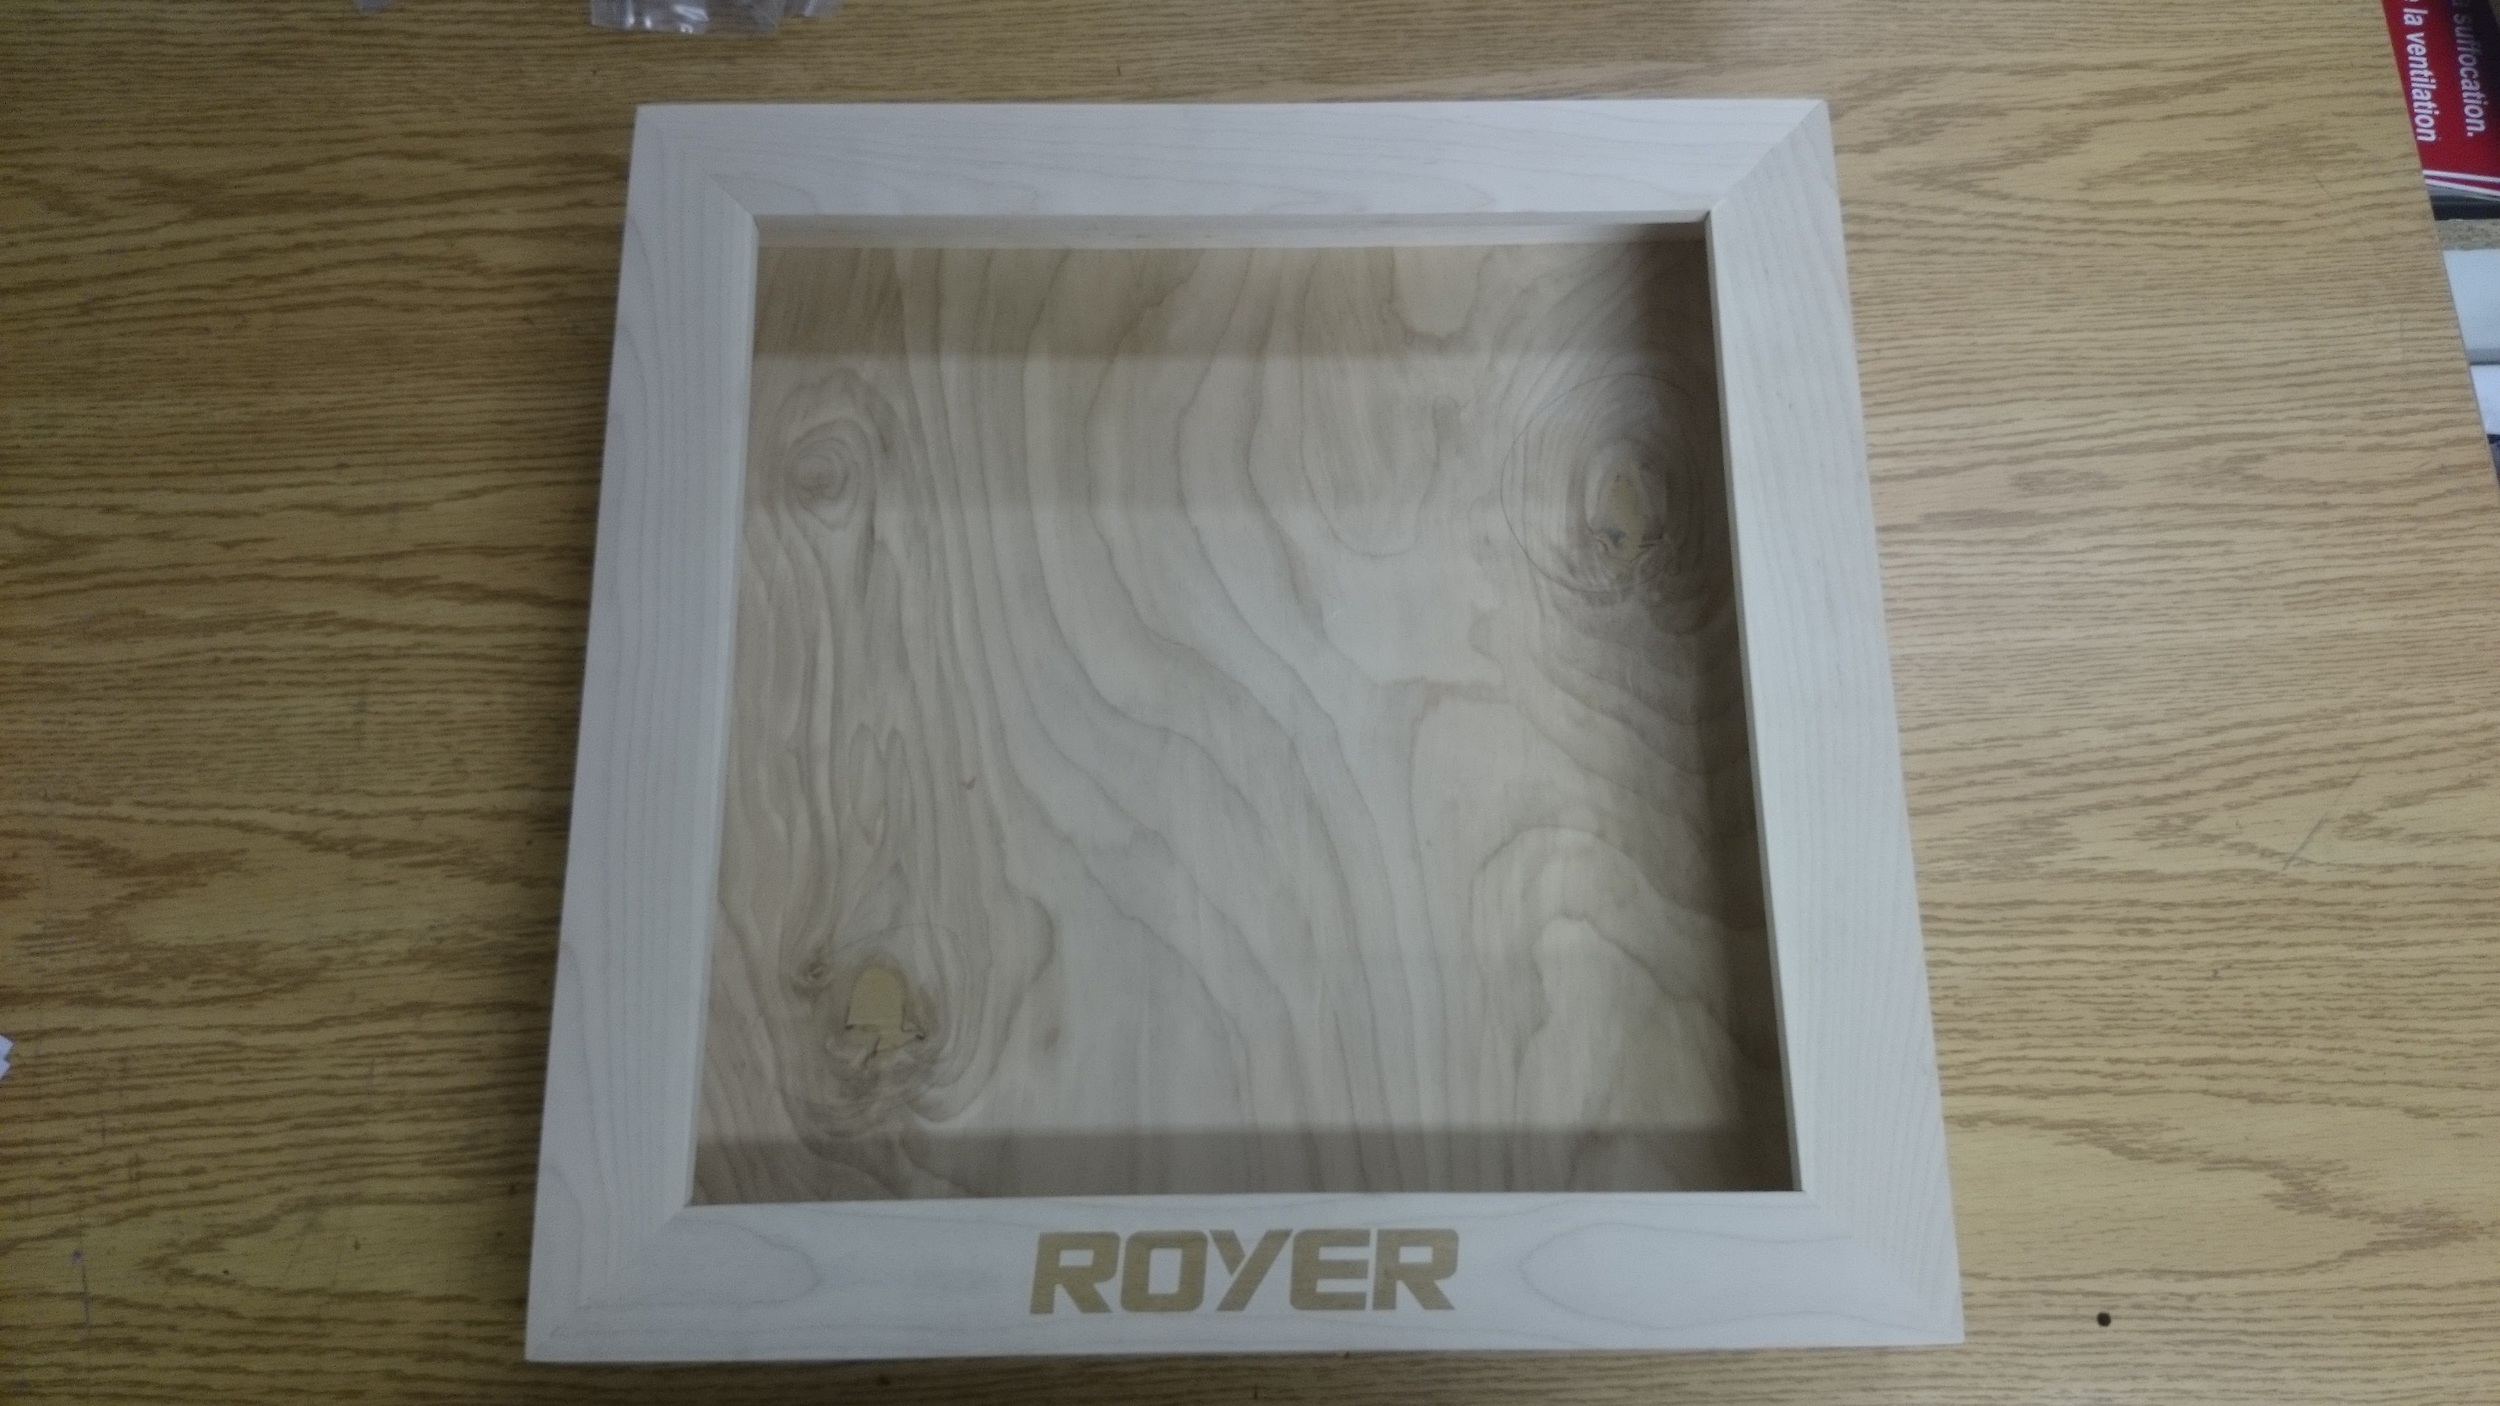 Wooden frame with logo